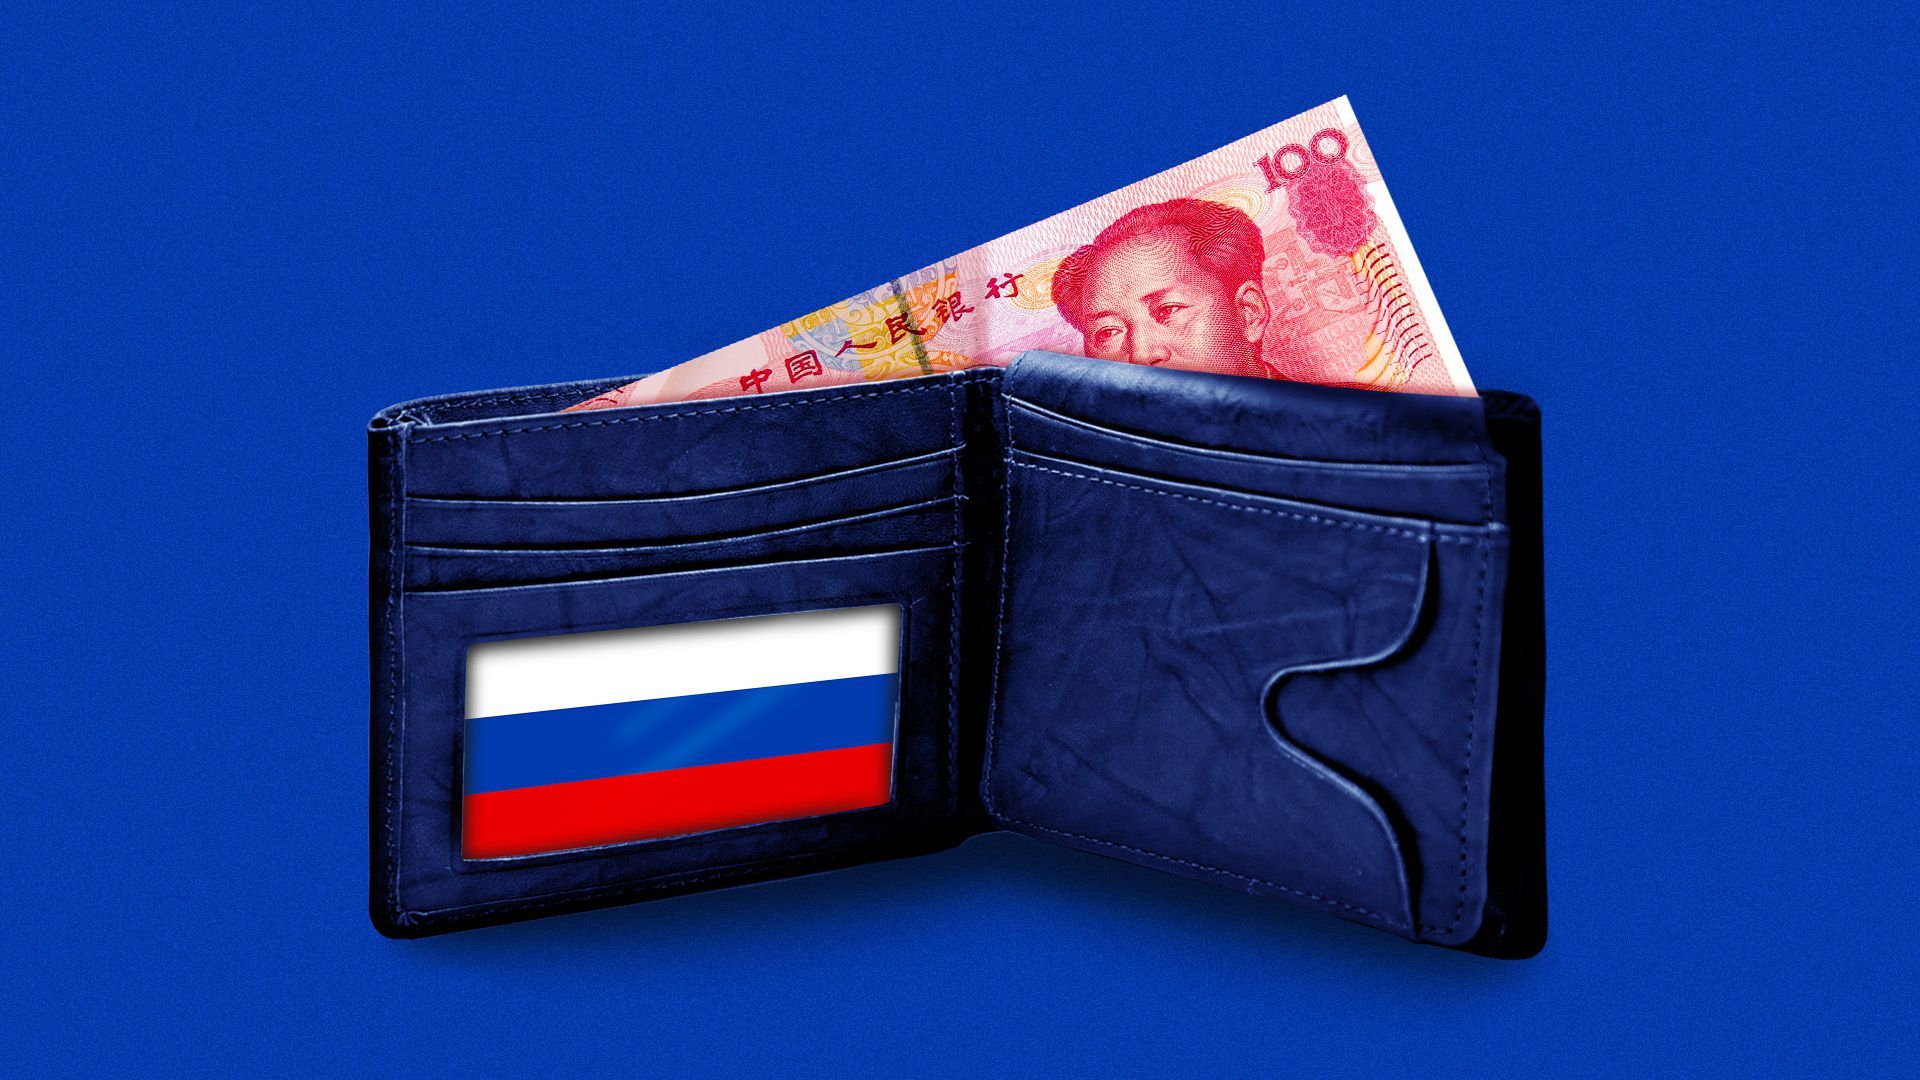 Illustration of a wallet featuring a Russian flag with a renminbi note 